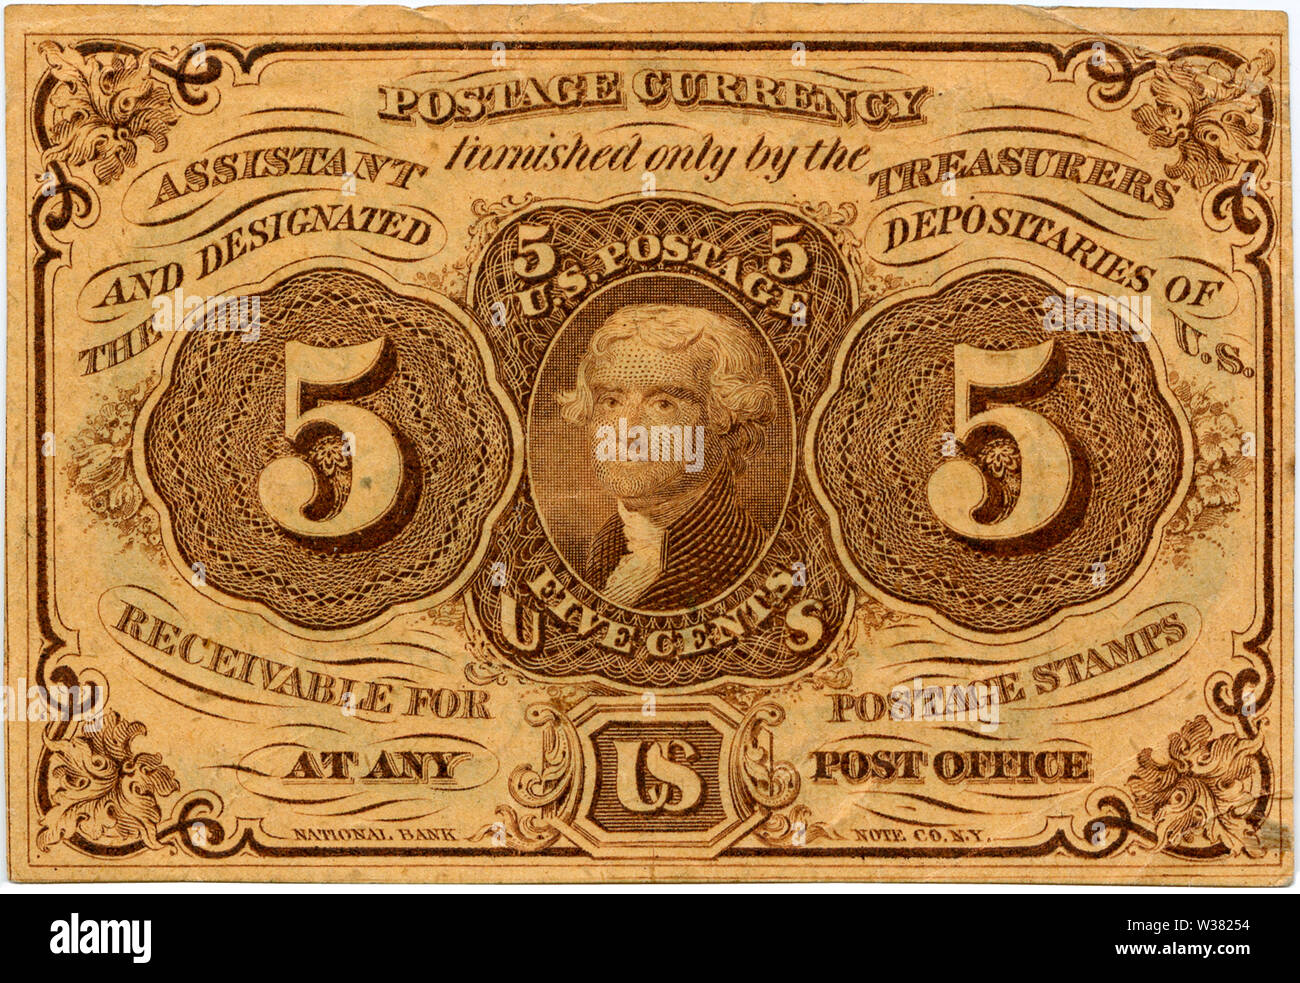 Five-cent US Postal Currency, first issue, featuring Thomas Jefferson. Gold, silver and copper coins were horded at the start of the  Civil War and postages stamps became a popular form of currency; however the adhesive back was a serious impediment. On July 17, 1862, Congress authorized printing of Postal Currency notes in the denominations of 5, 10, 25 and 50 cents. These notes could be redeemed for postage stamps or for a US bank note in the amount of five dollars or more. The  Postal Currency was succeeded by  Fractional Currency in 1863. The Post Office kept detailed records and 44,857,78 Stock Photo